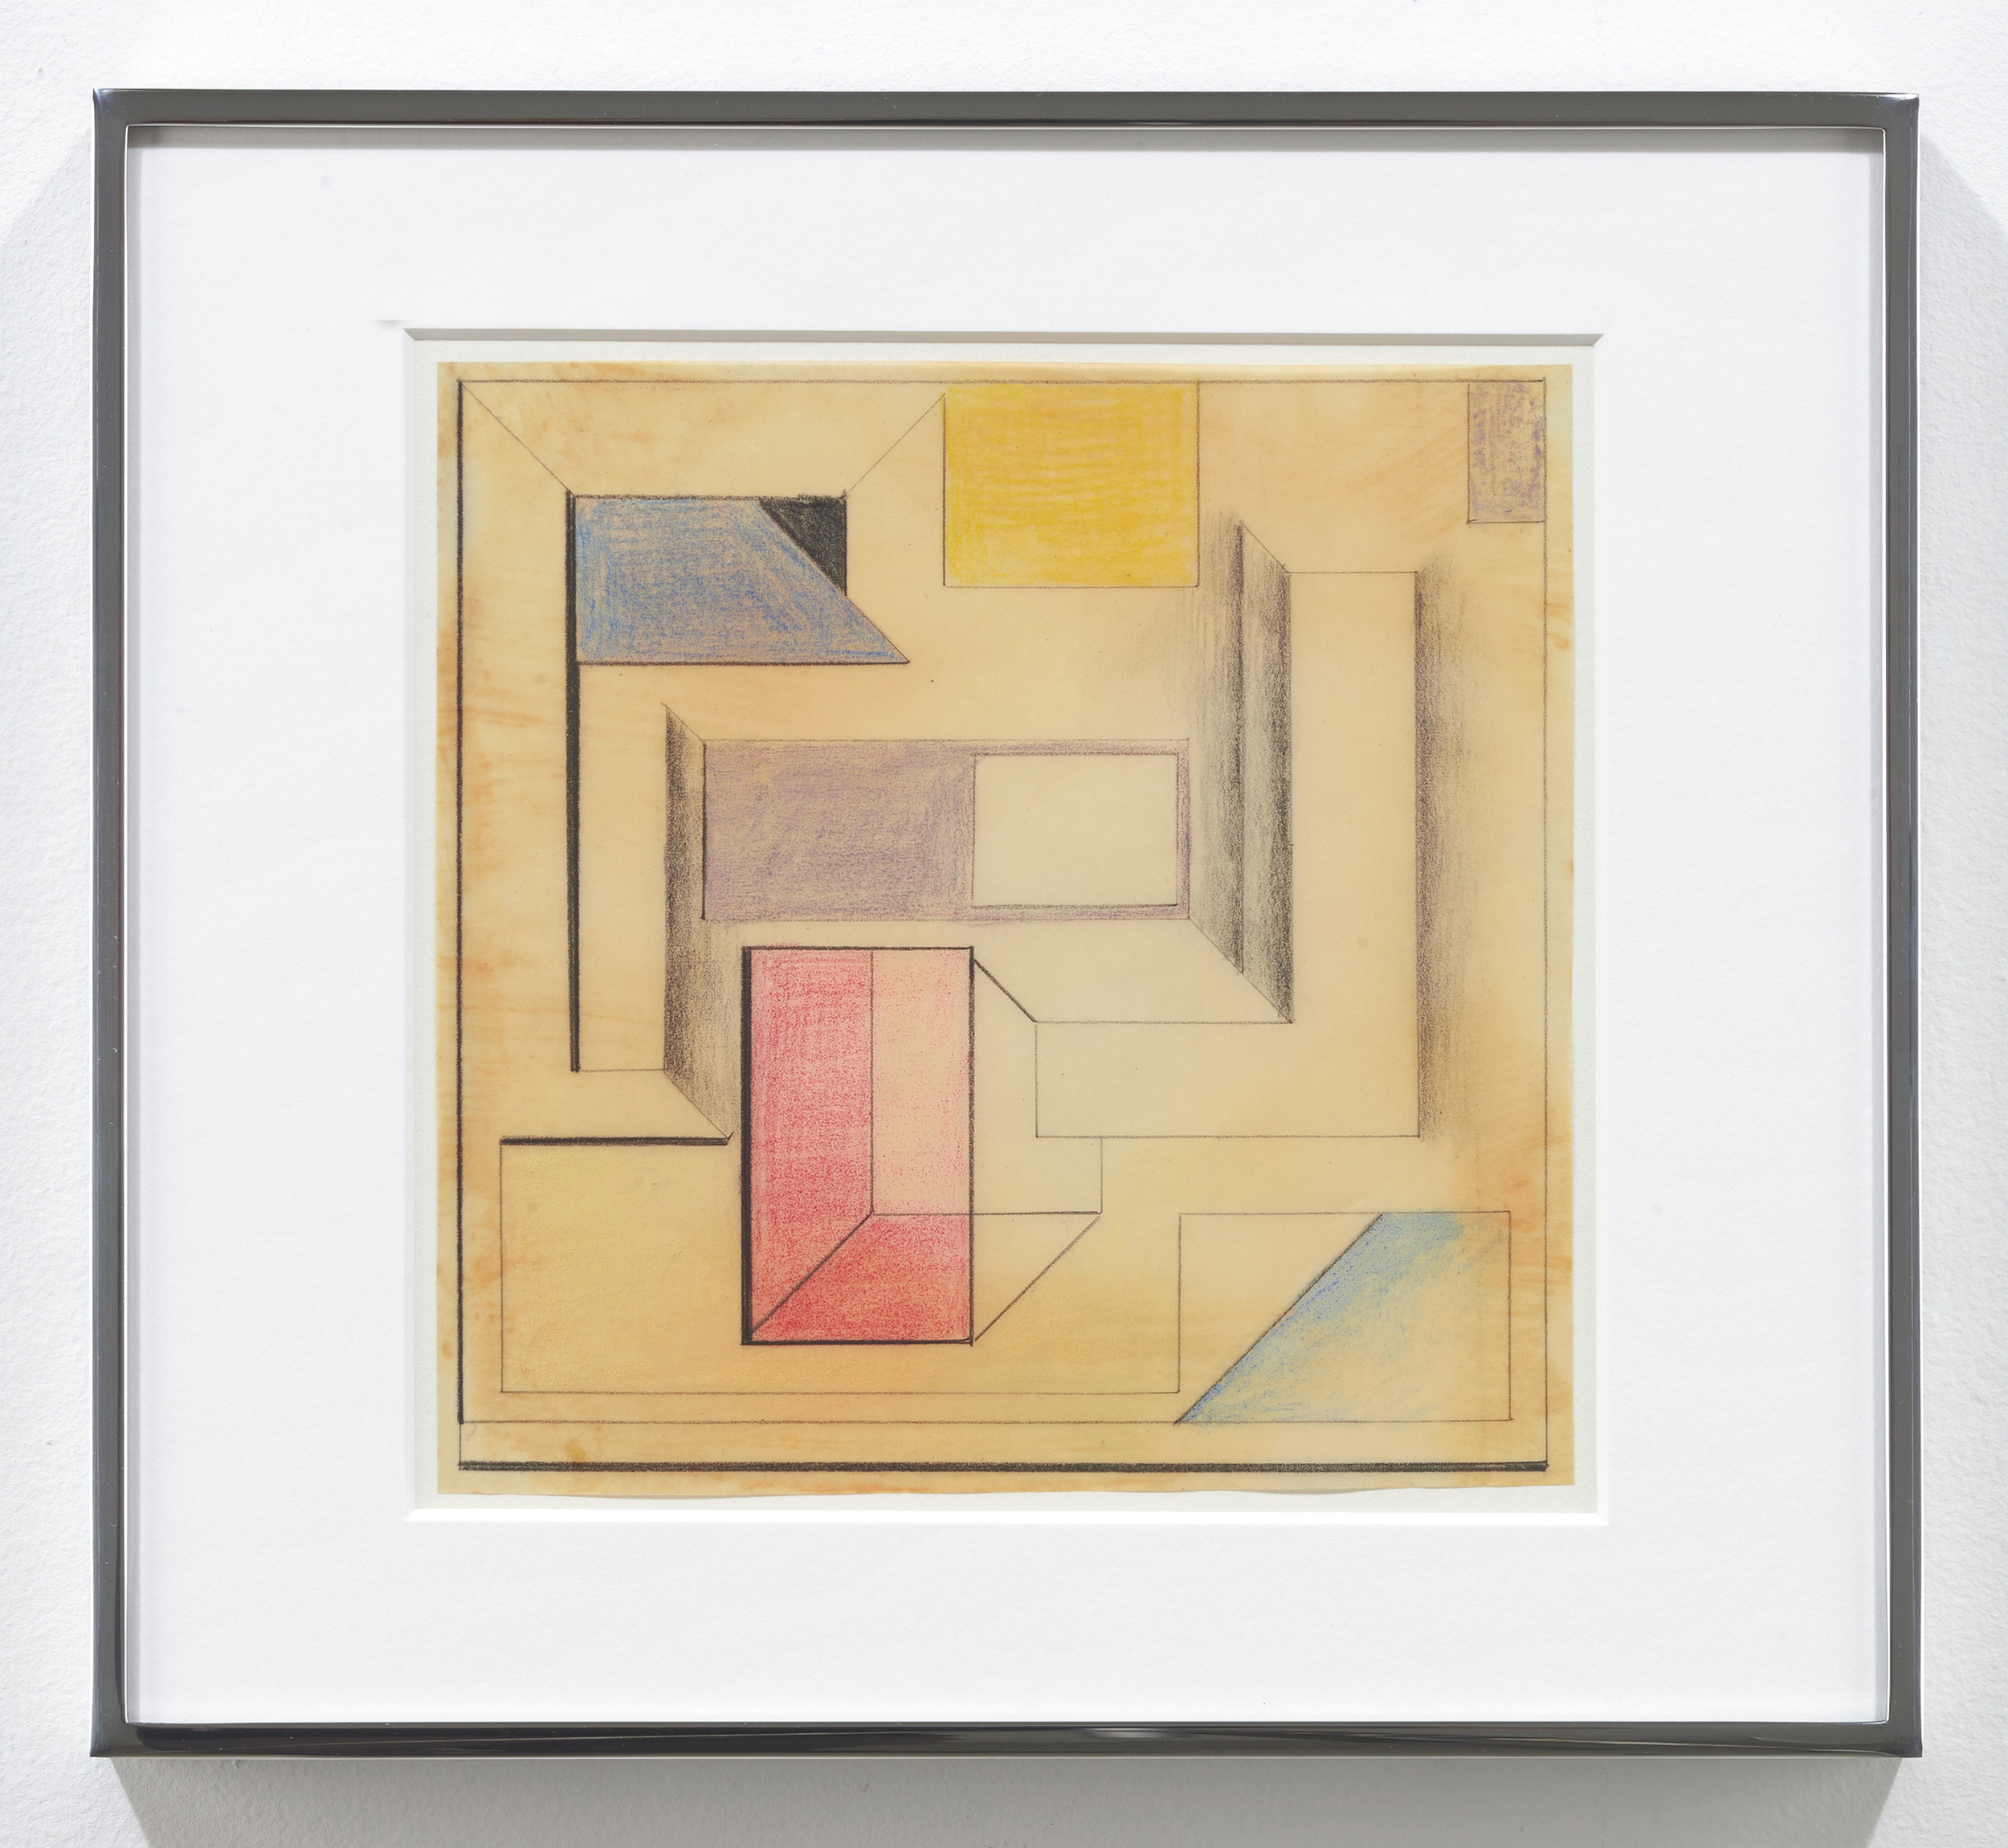  Suzanne Blank Redstone,  Drawing for Construction #6 , 1968, Paper, tracing paper, pencil and color pencil, Framed dimensions: 10.25 x 11.25 inches 